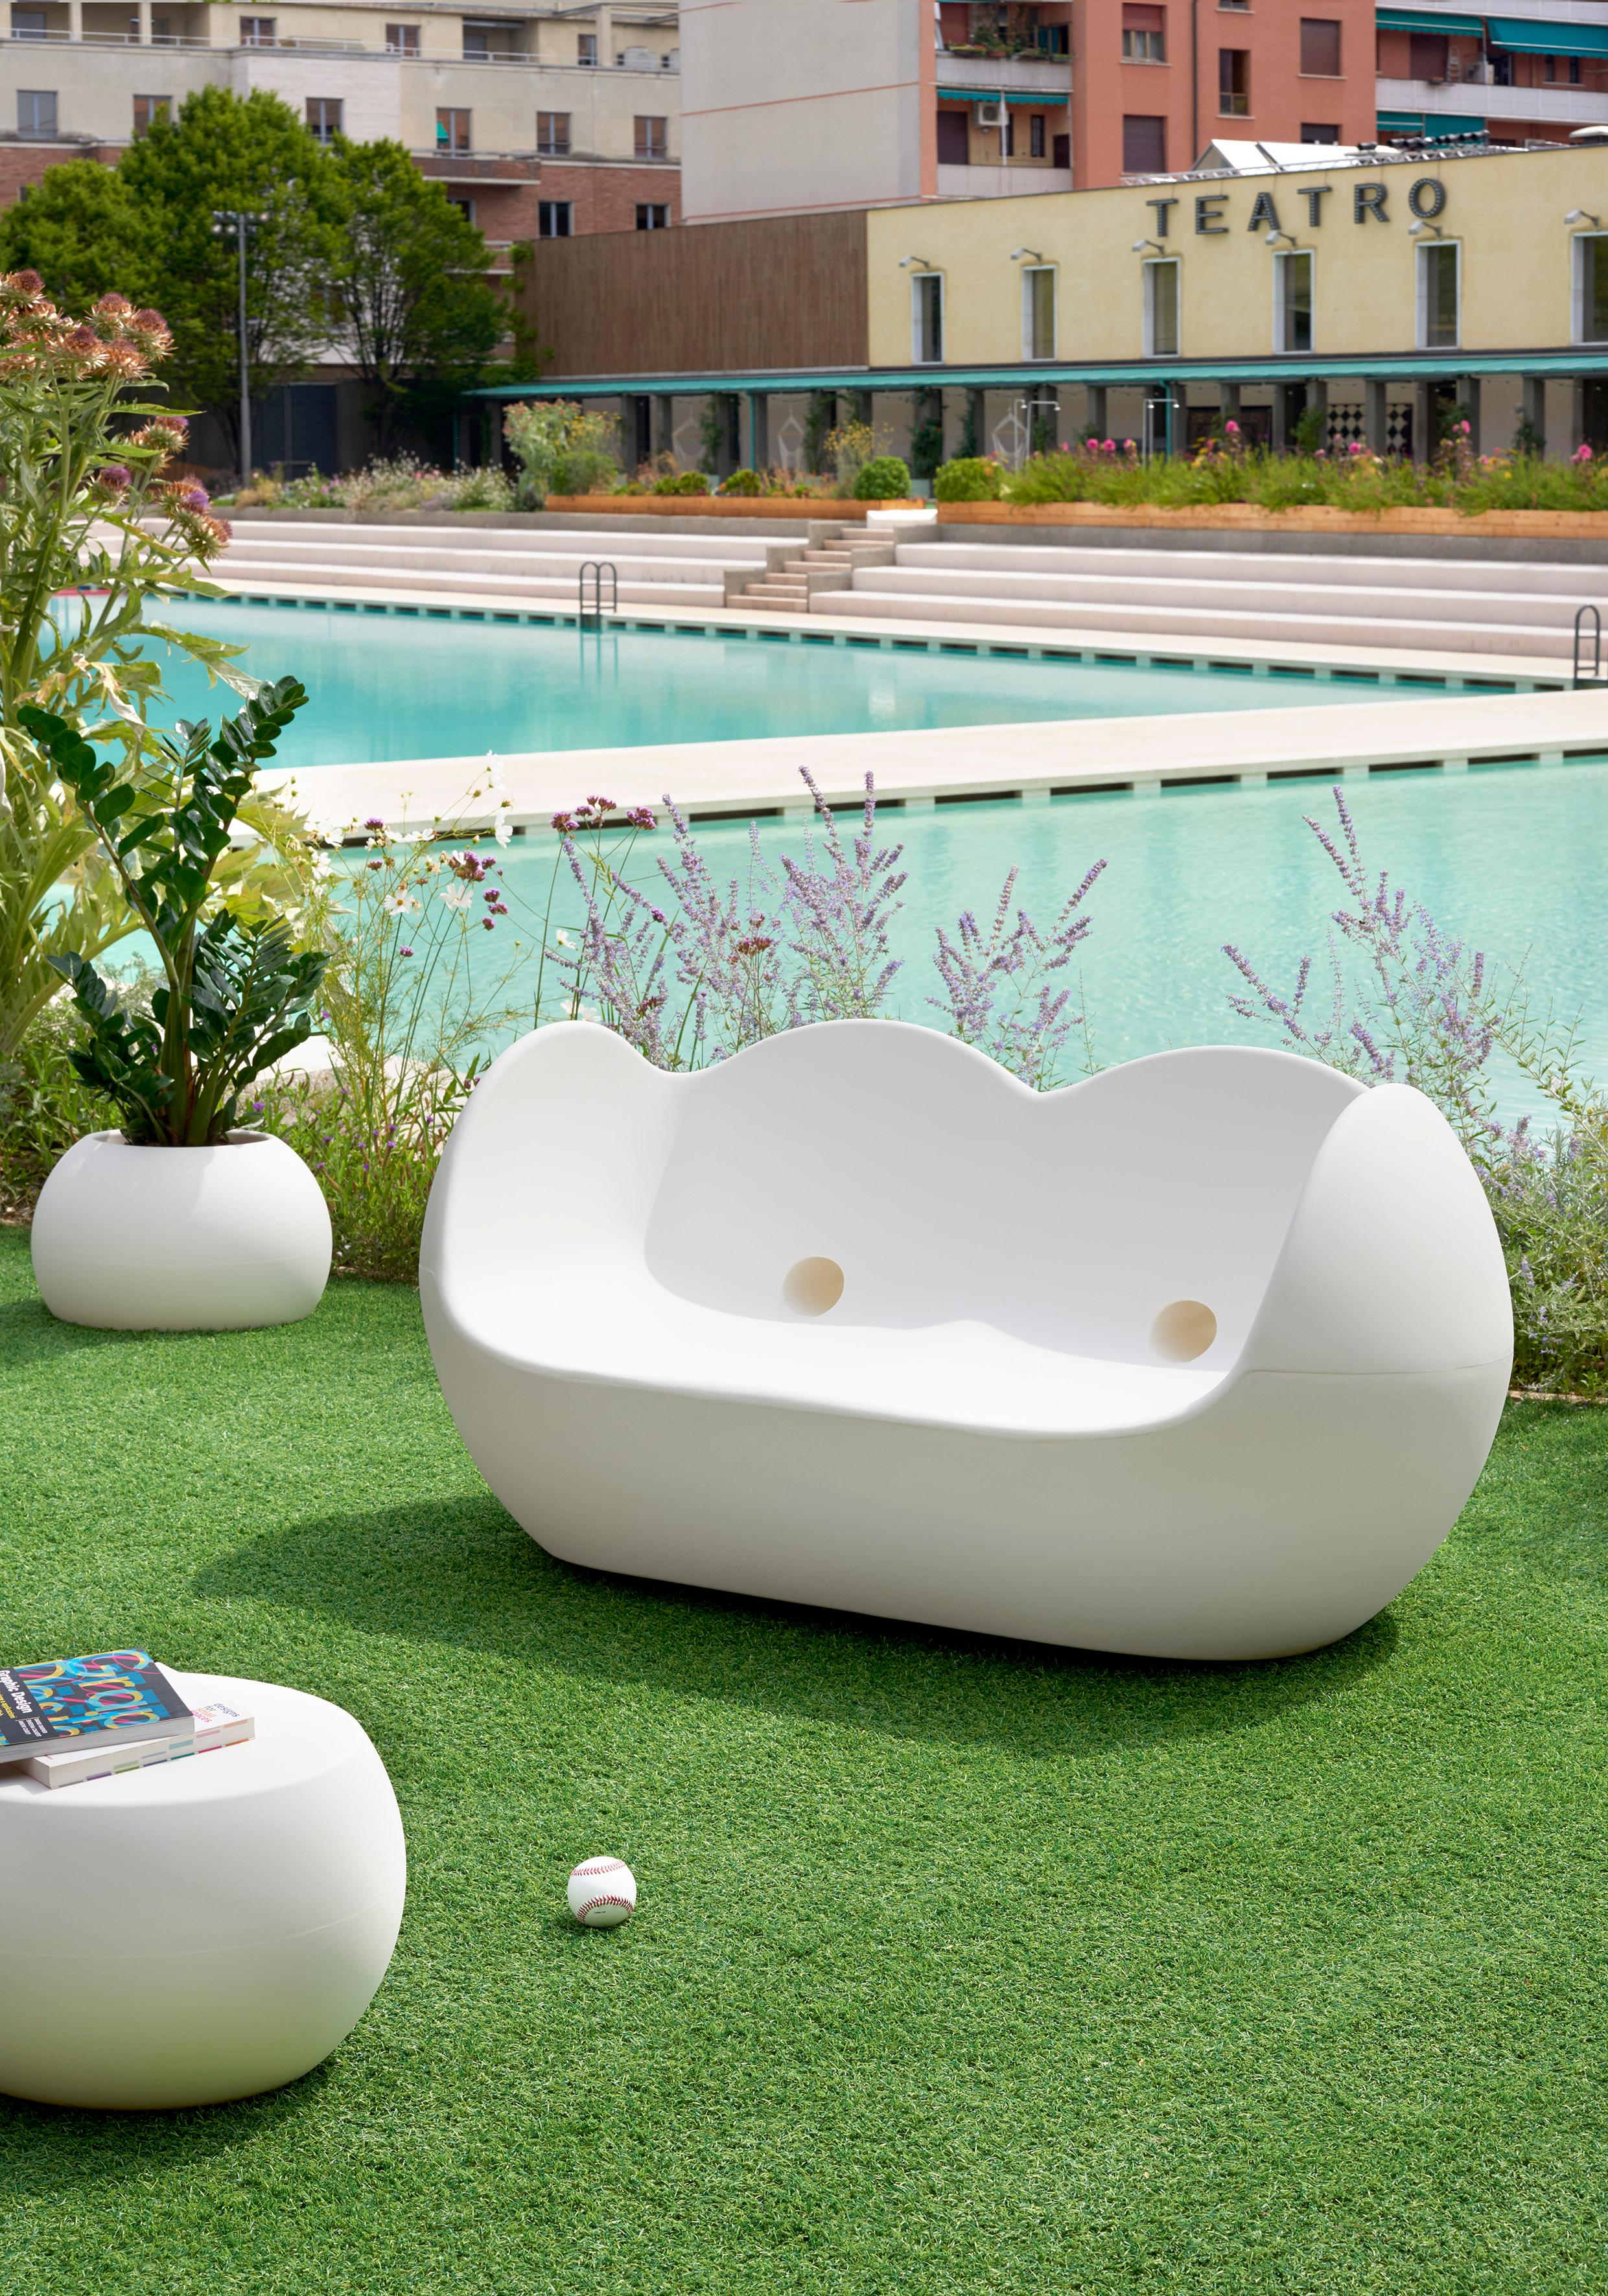 Chocolate Brown Blossy Rocking Sofa by Karim Rashid
Dimensions: D 85 x W 159 x H 75 cm. Seat Height: 34 cm.
Materials: Polyethylene.
Weight: 38 kg.

Available in different color options. This product is suitable for indoor and outdoor use. Please